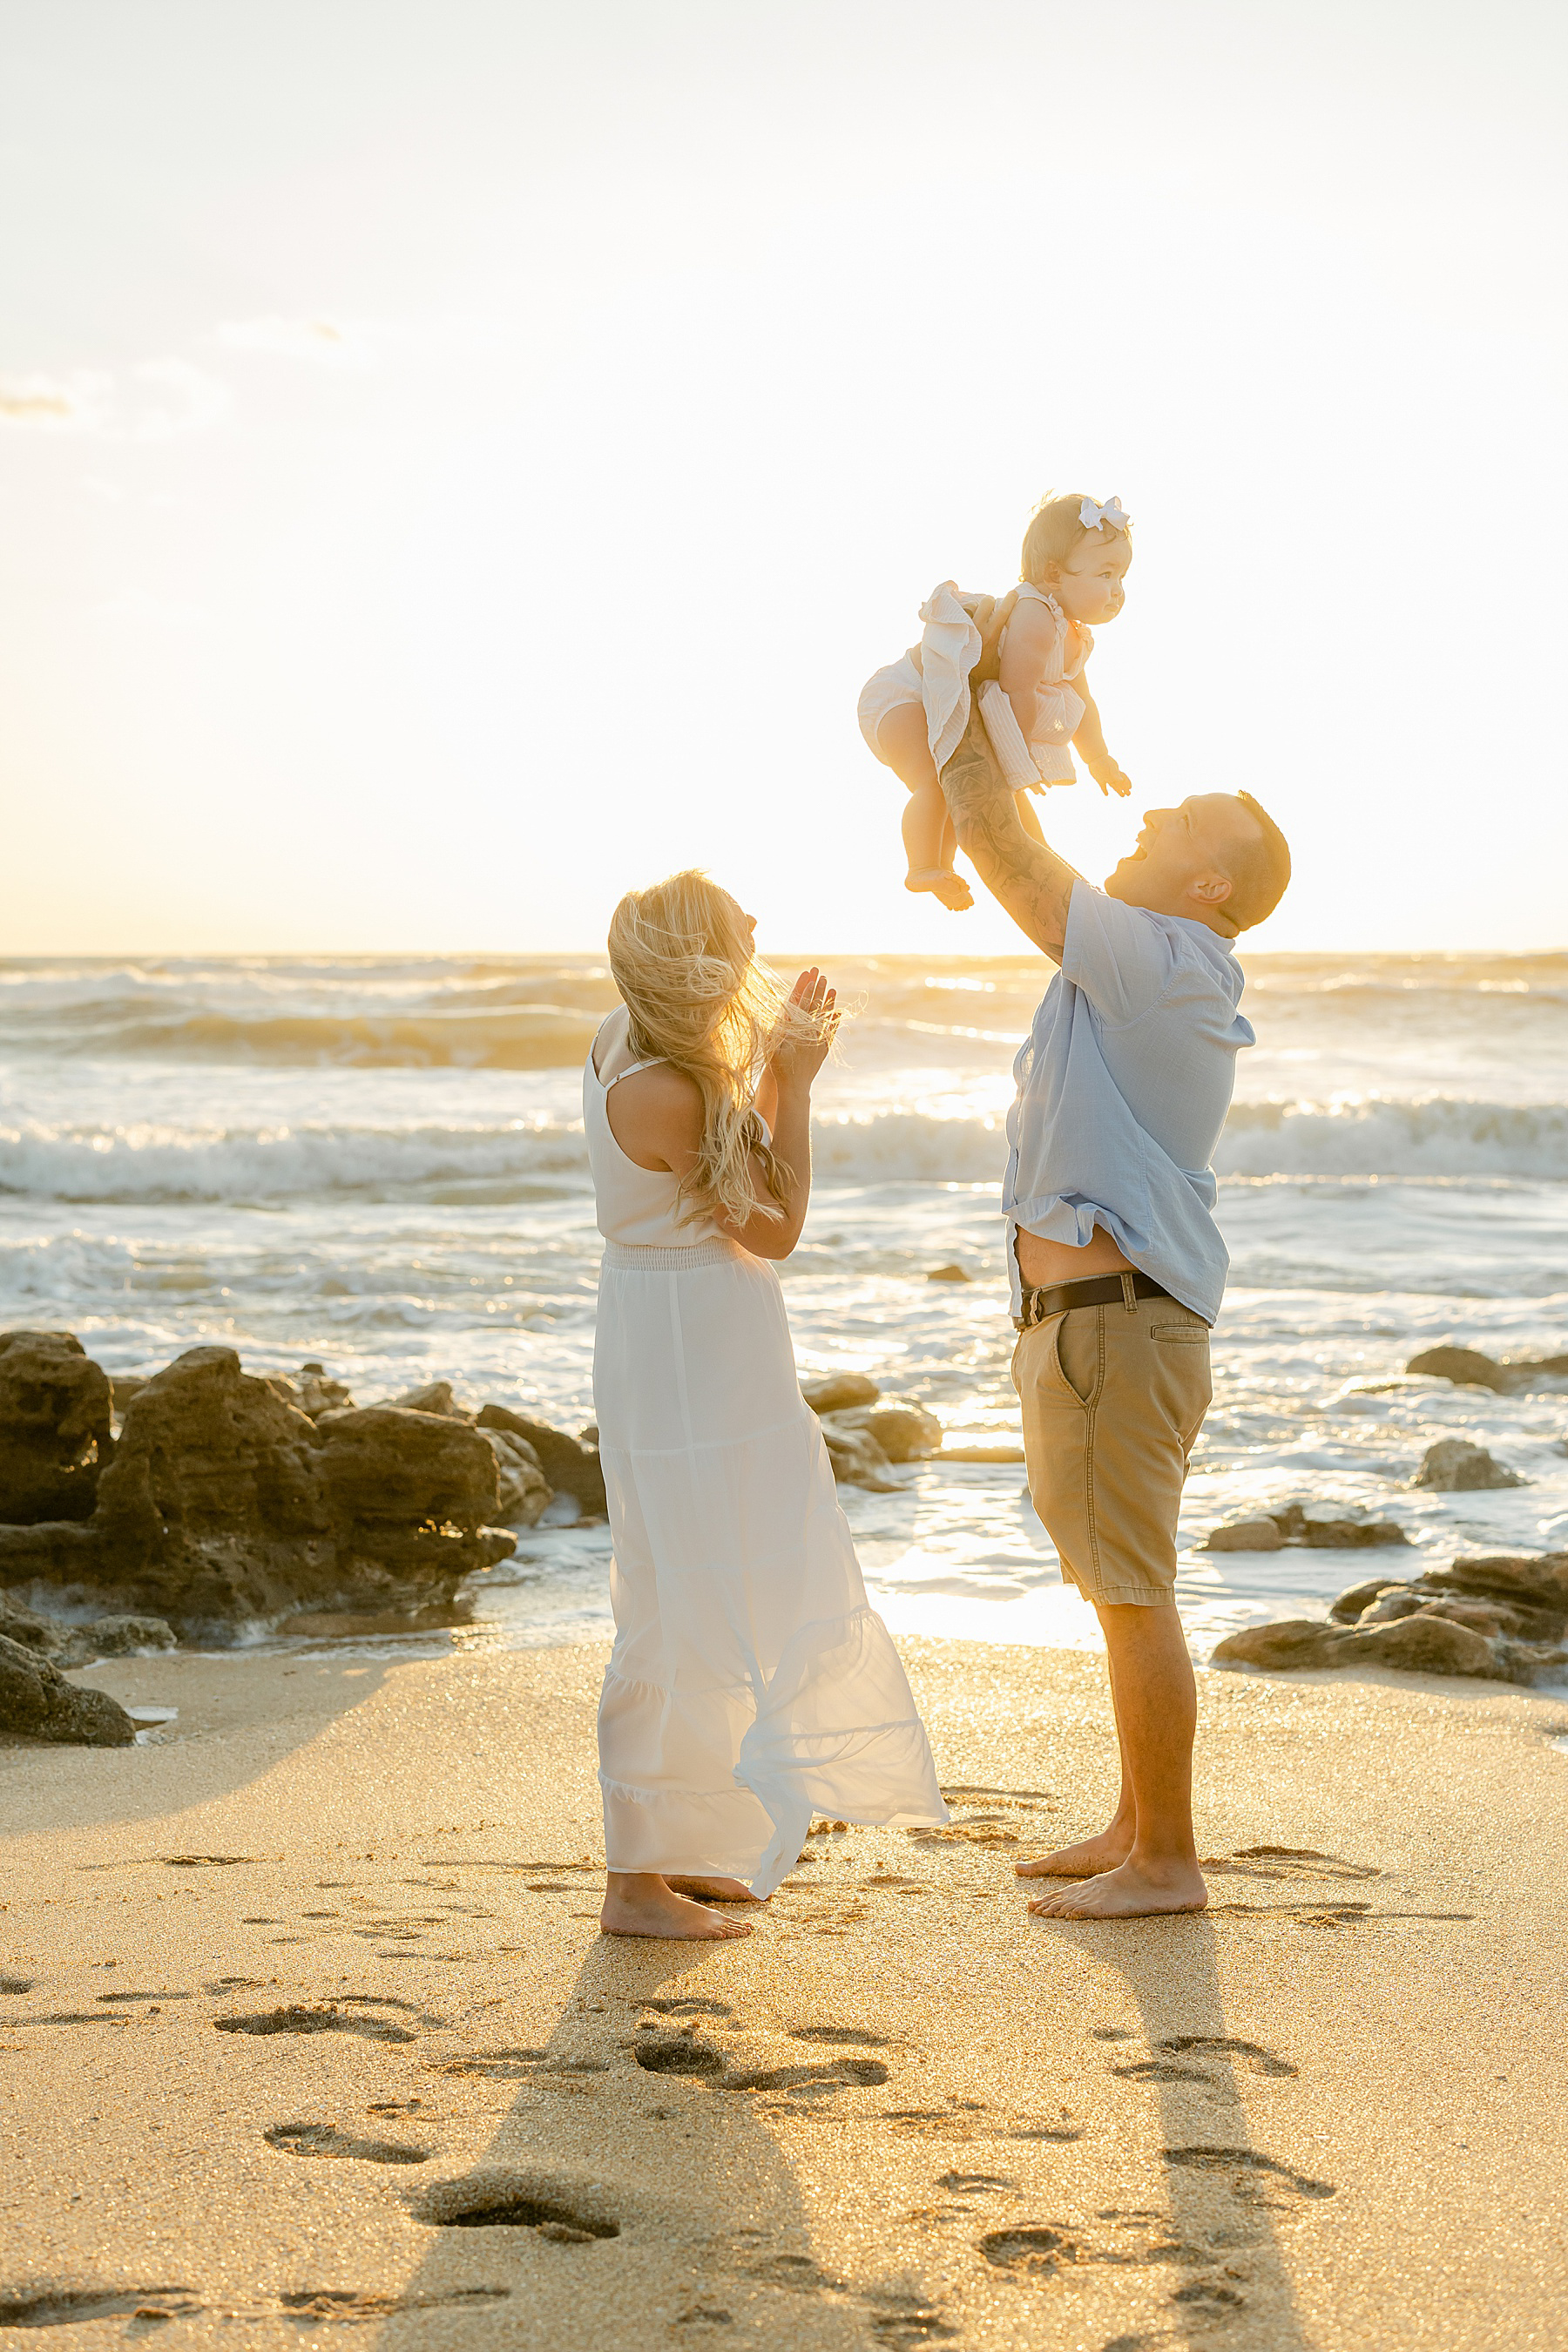 man wearing light blue shirt holding baby girl at sunrise on the beach with woman standing next to him